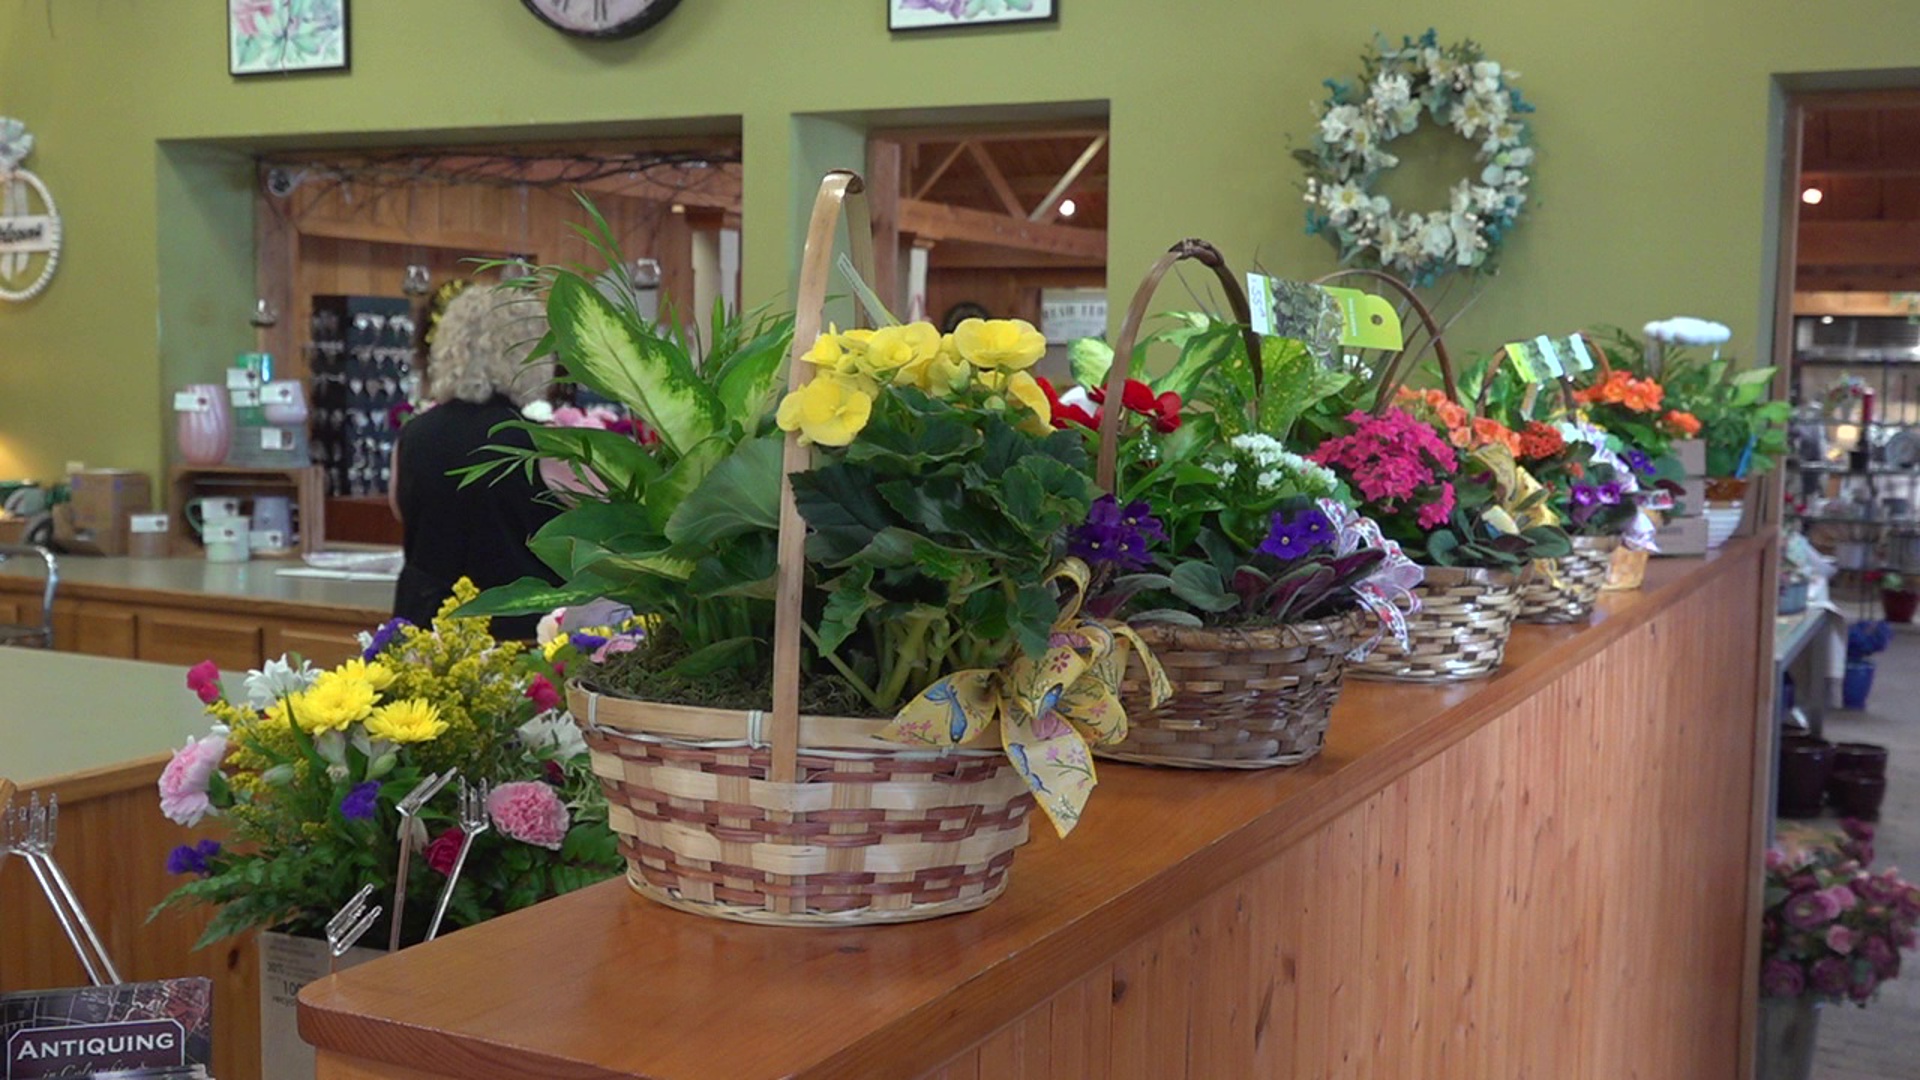 Mother's Day is coming up, and it's one of the busiest weekends for florists.